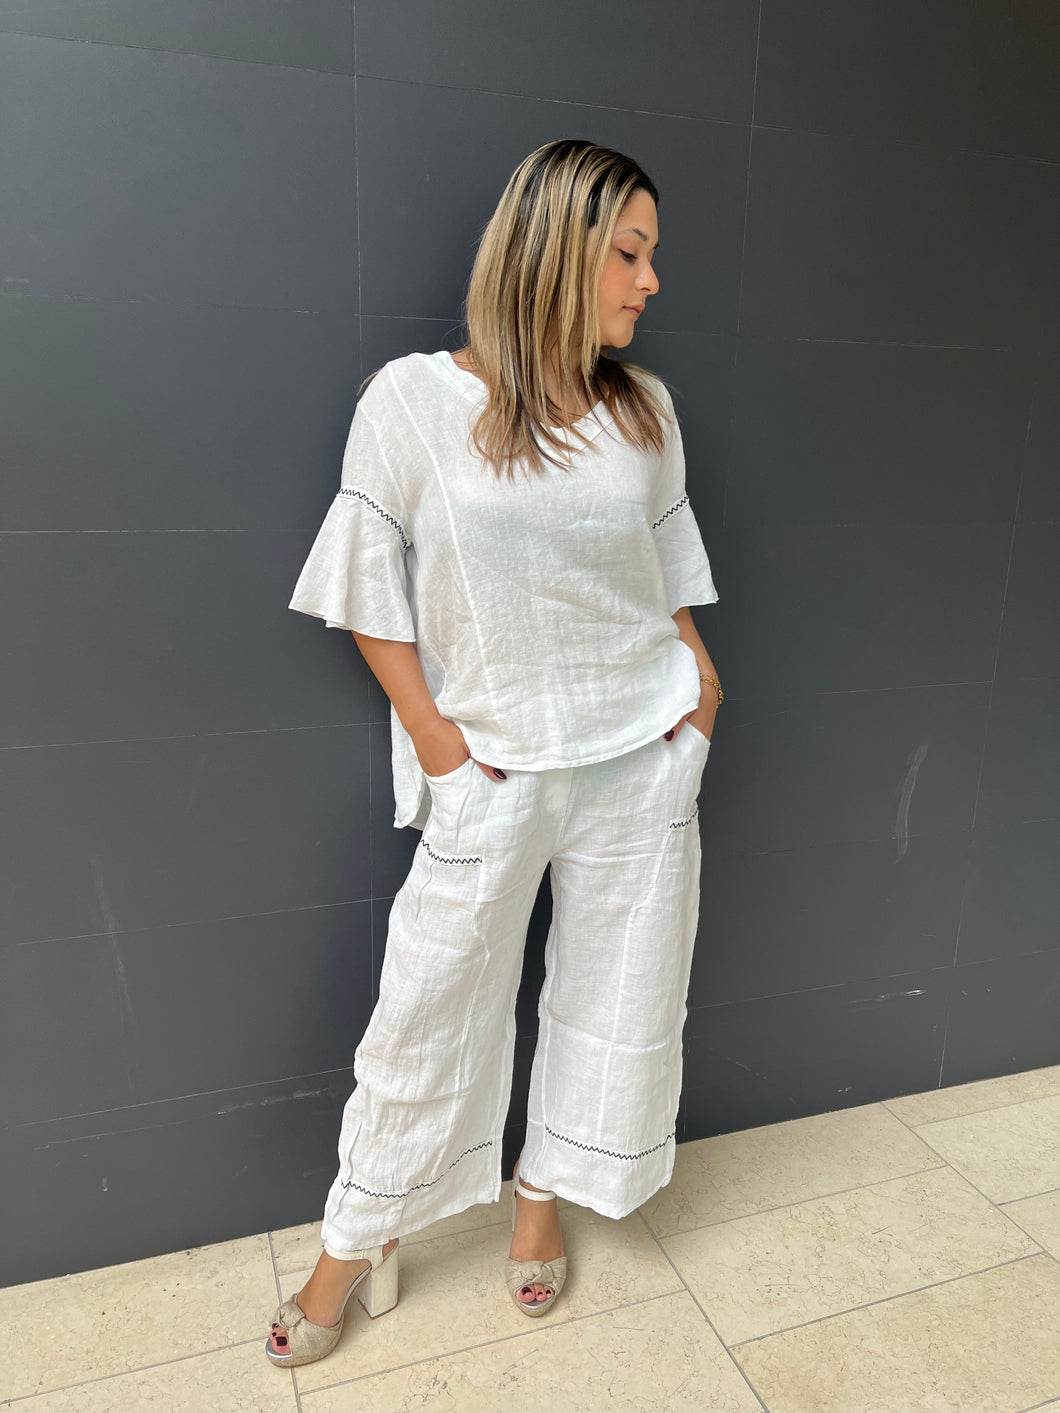 K linen white with embroidery details set